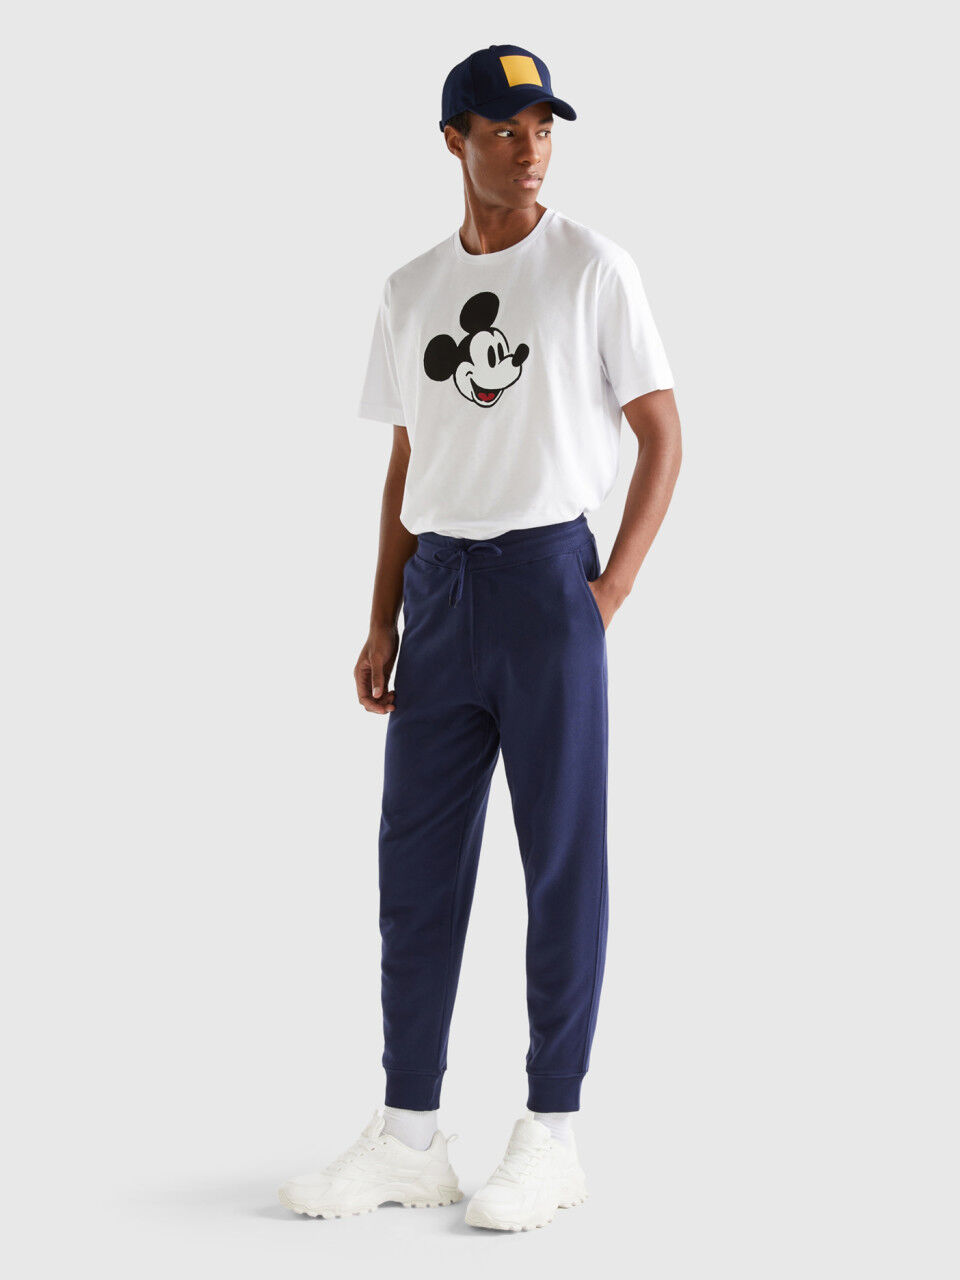 Designer Track Pants For Men Luxury Letter Printed Pure Cotton Trousers For  Fashionable Street Couples Available In Sizes S XXXL From Wangkai6, $32.69  | DHgate.Com